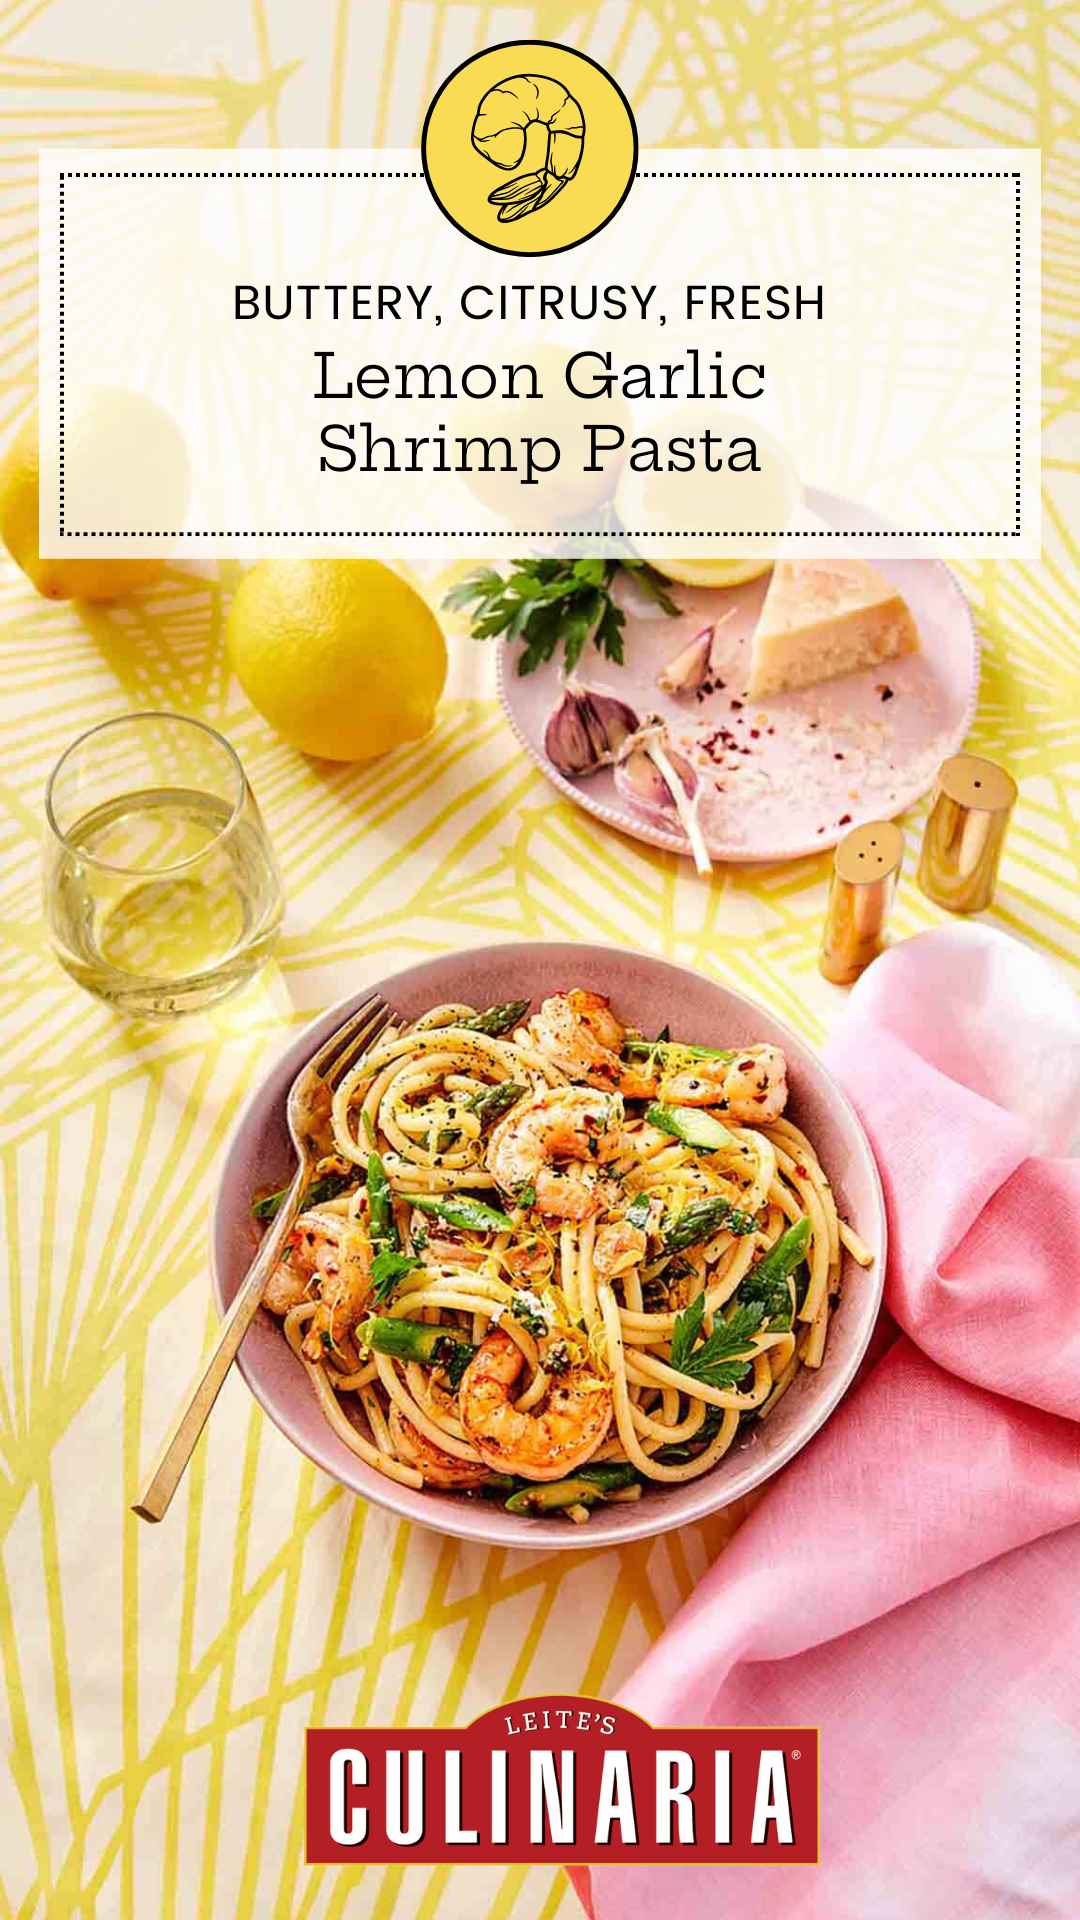 A bowl filled with lemon garlic shrimp pasta with a glass of white wine, a pink napkin, and lemons nearby.